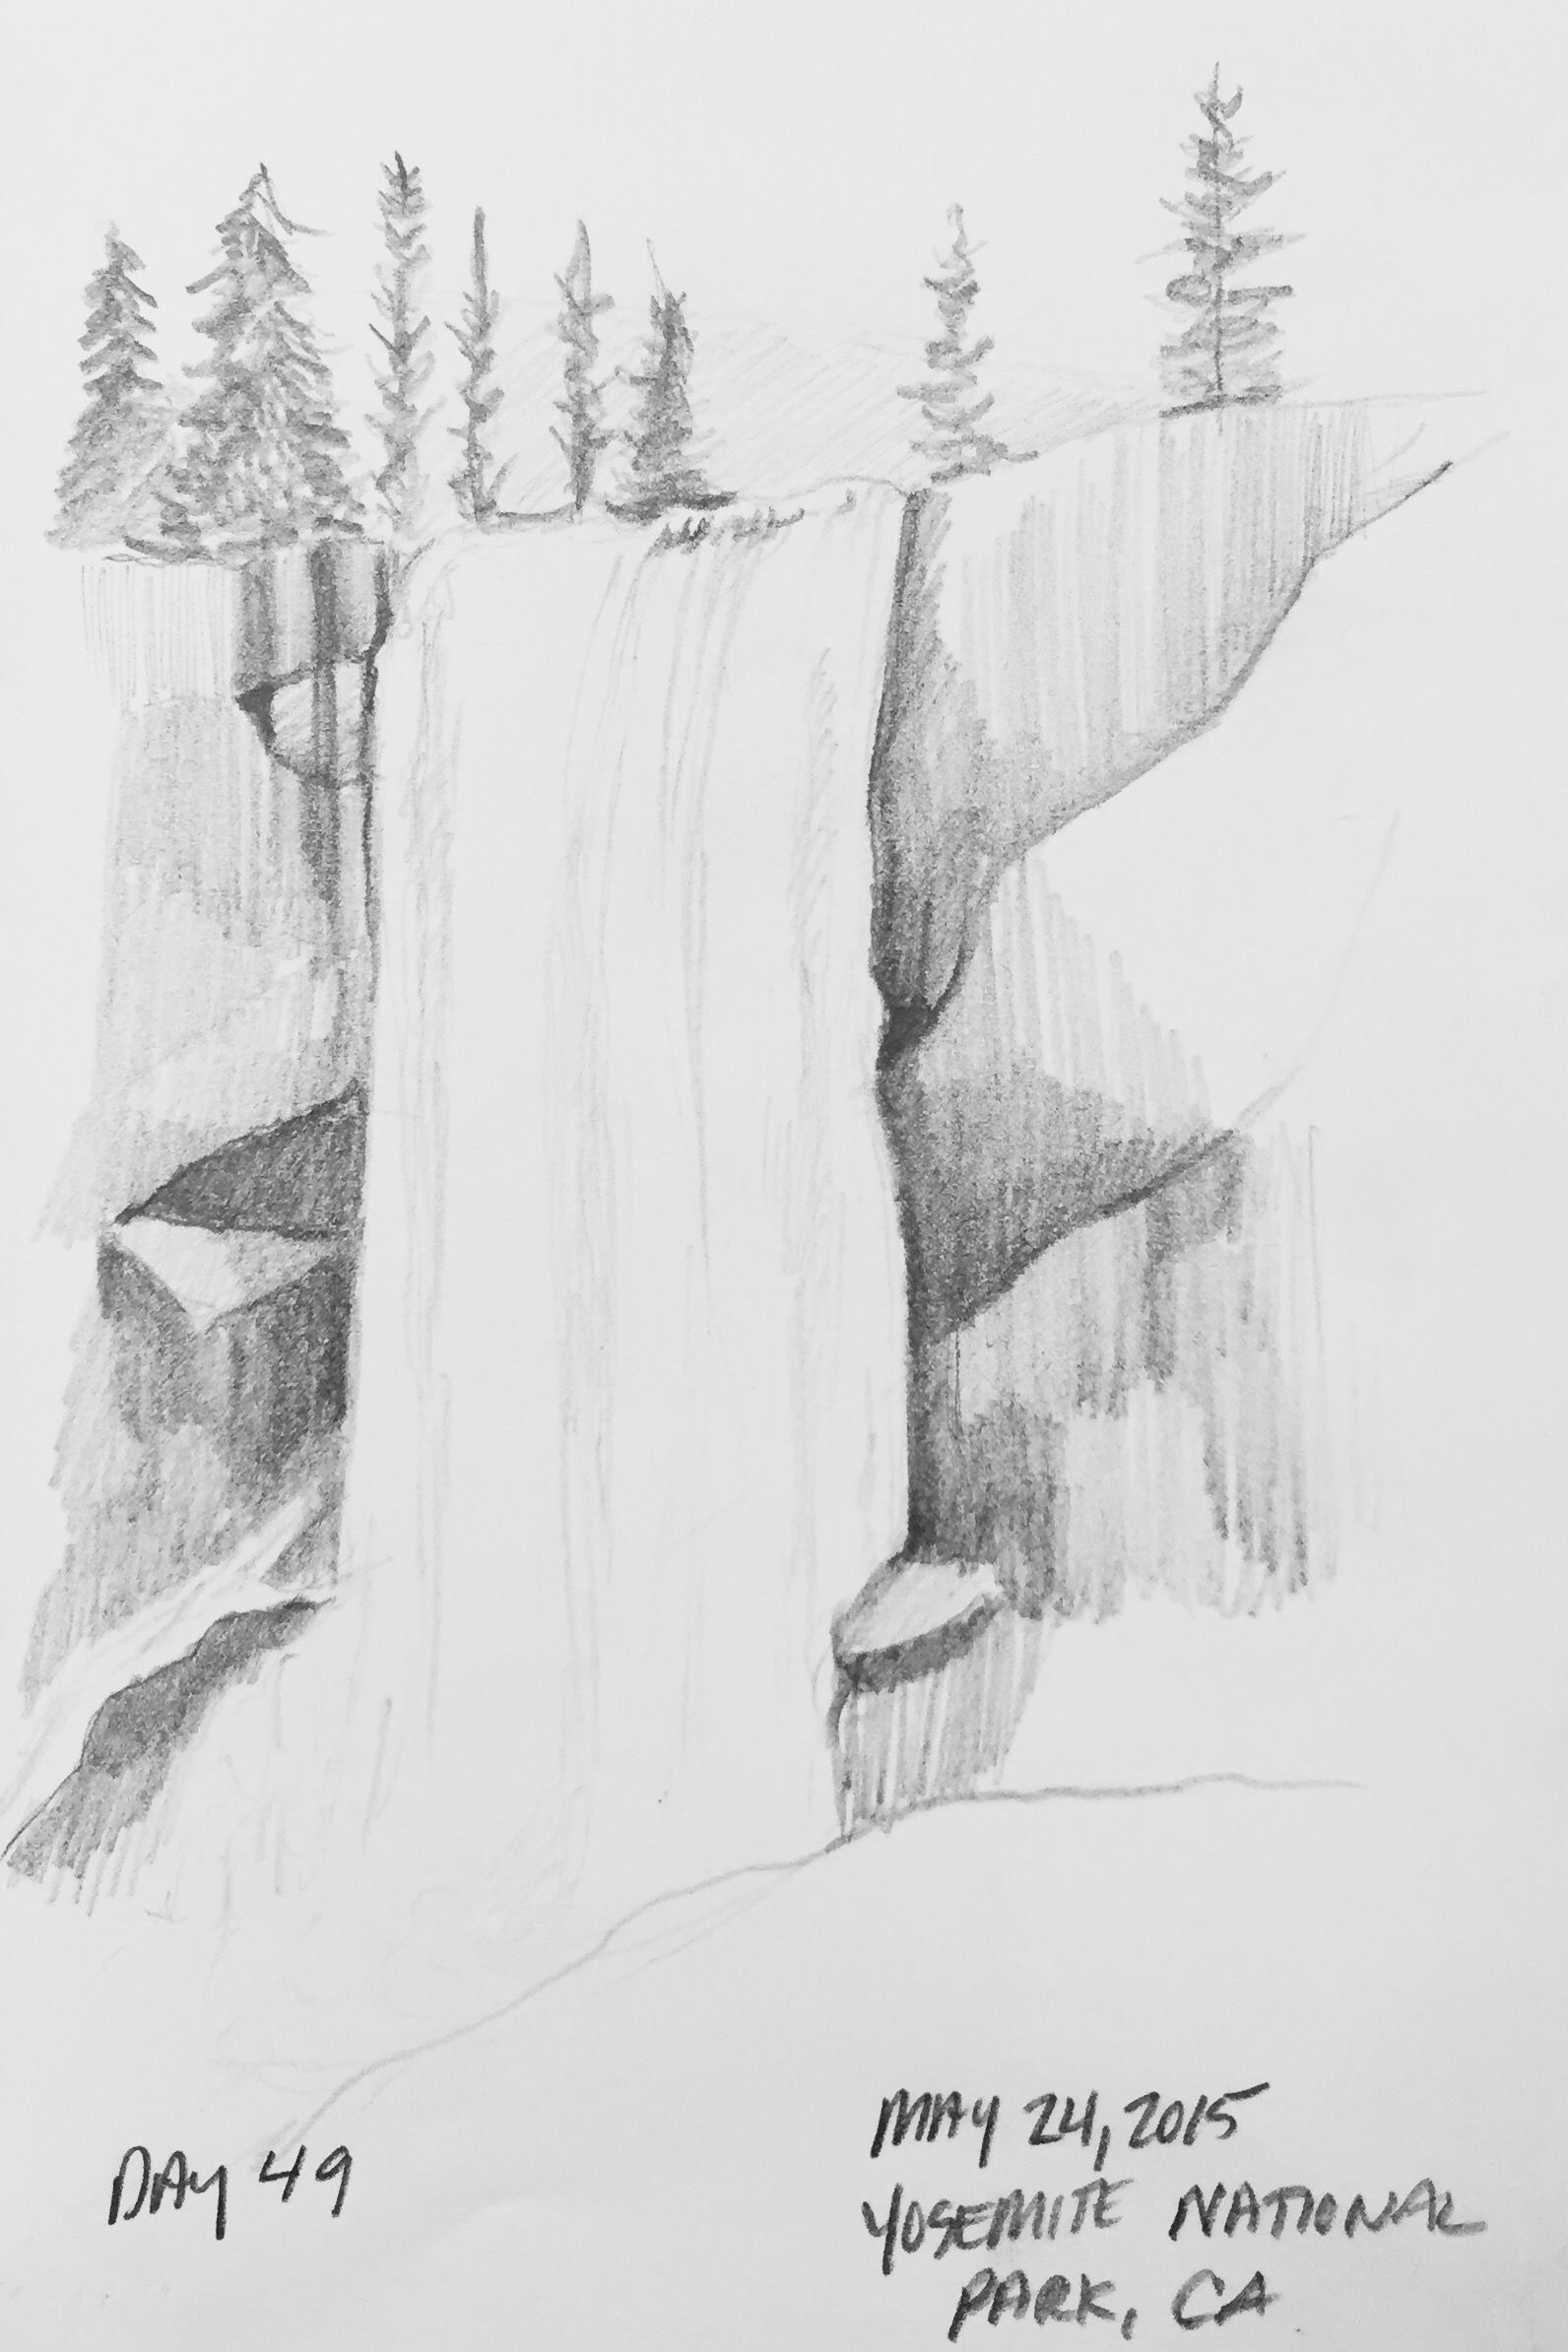 Easy Waterfall Drawing at PaintingValley.com | Explore collection of